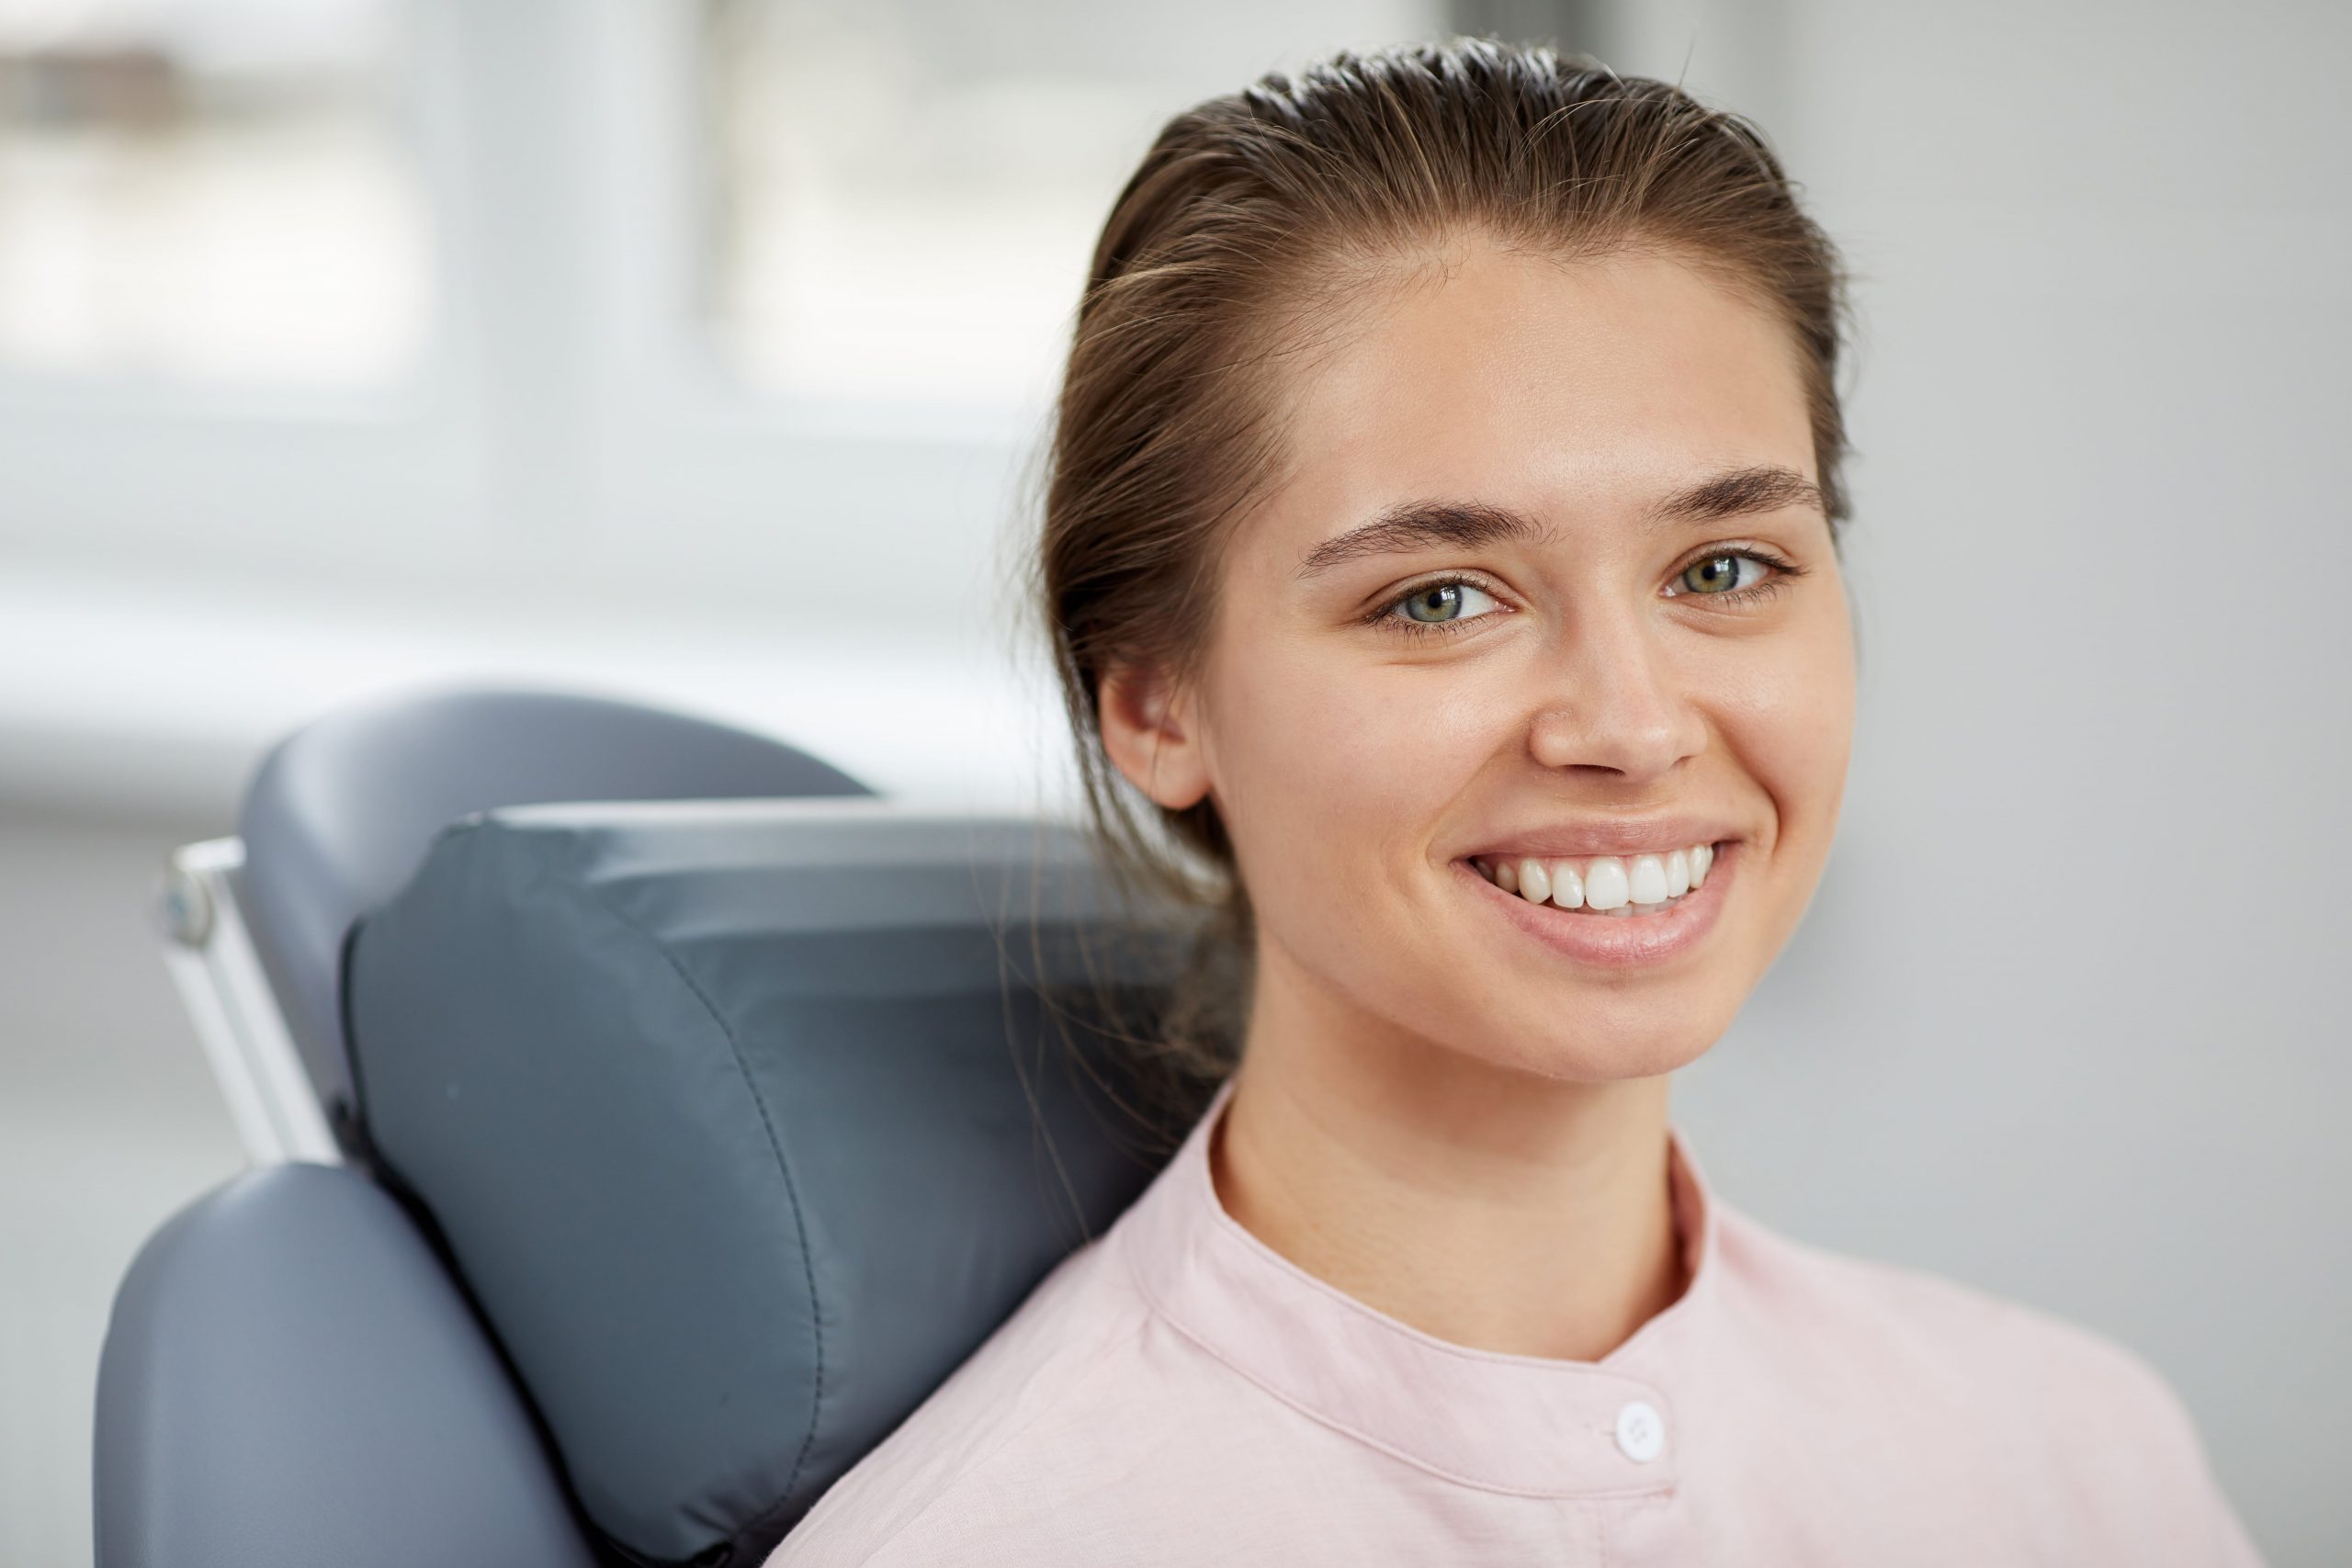 Are You a Candidate for Dental Implants in Turkey?